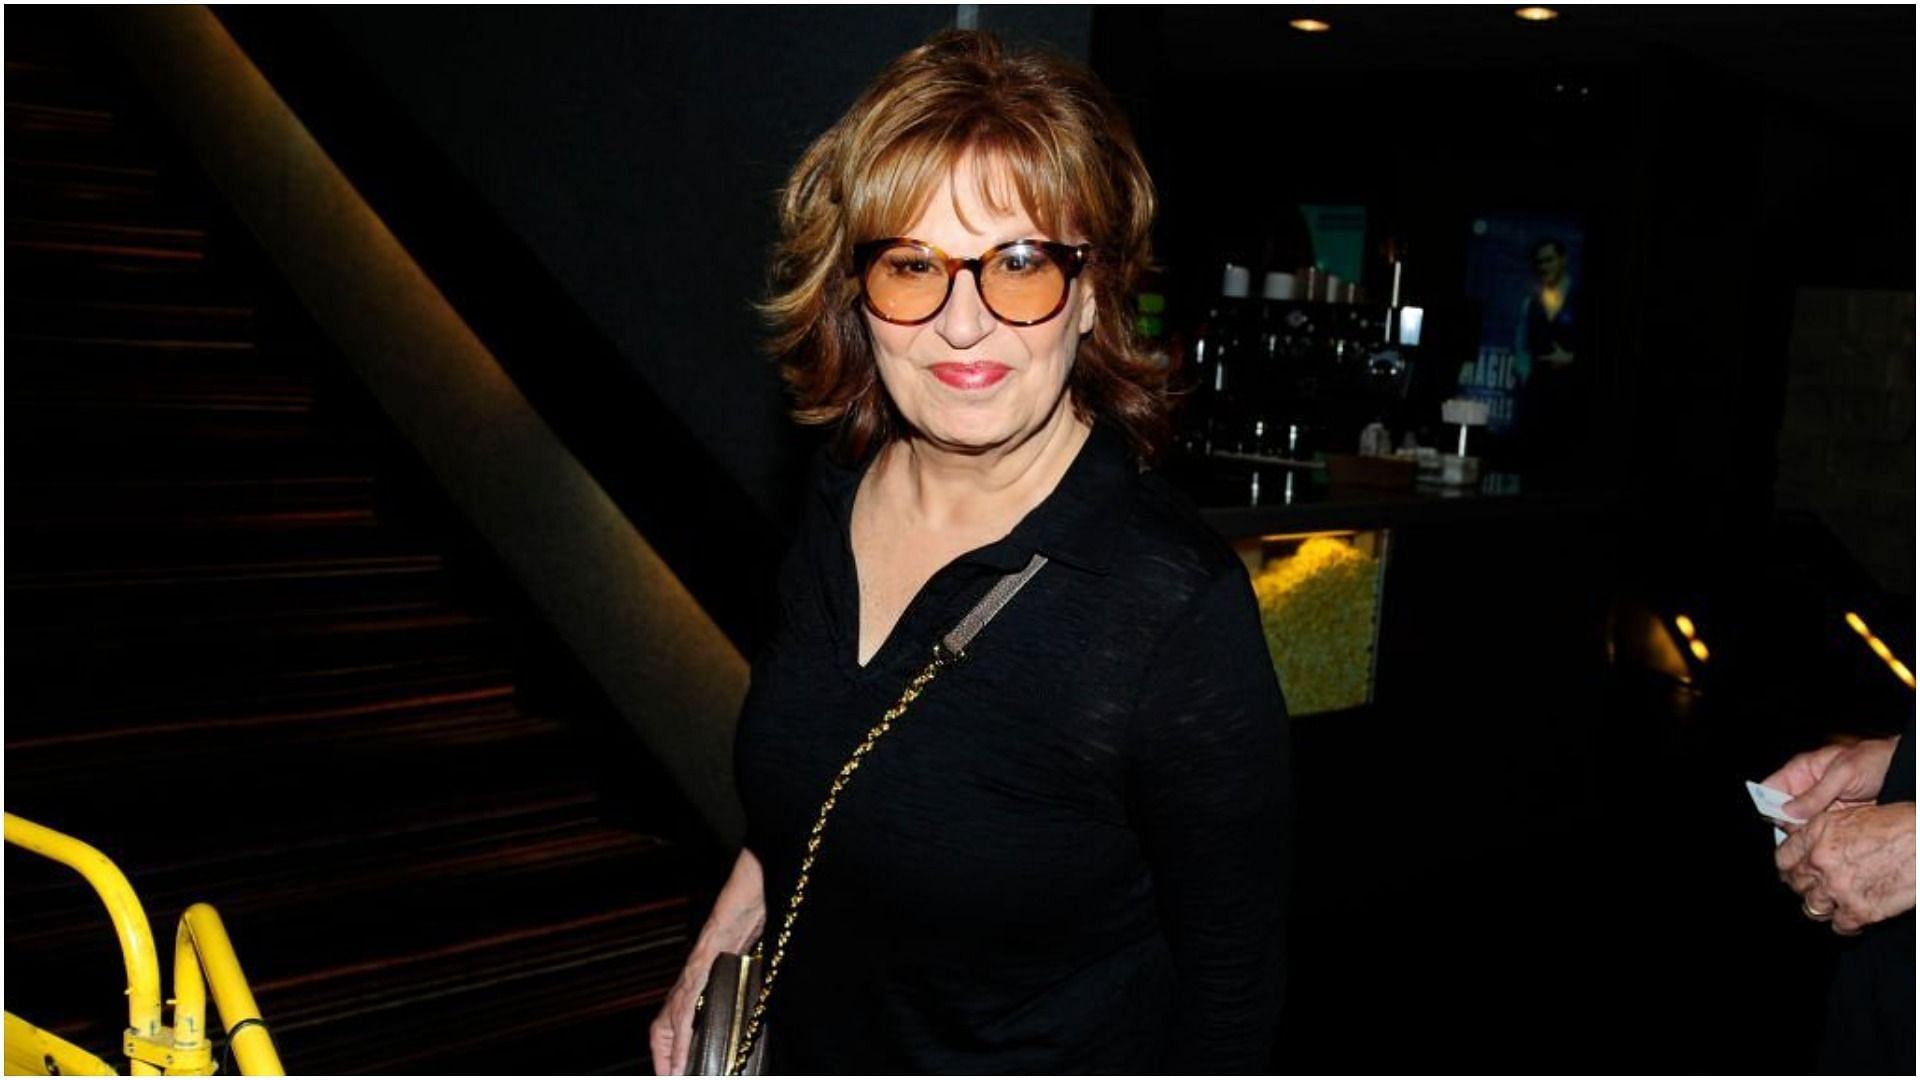 Joy Behar&rsquo;s recent comments on the Russian-Ukraine conflict have not veen been received well (Image via Paul Bruinooge/Getty Images)